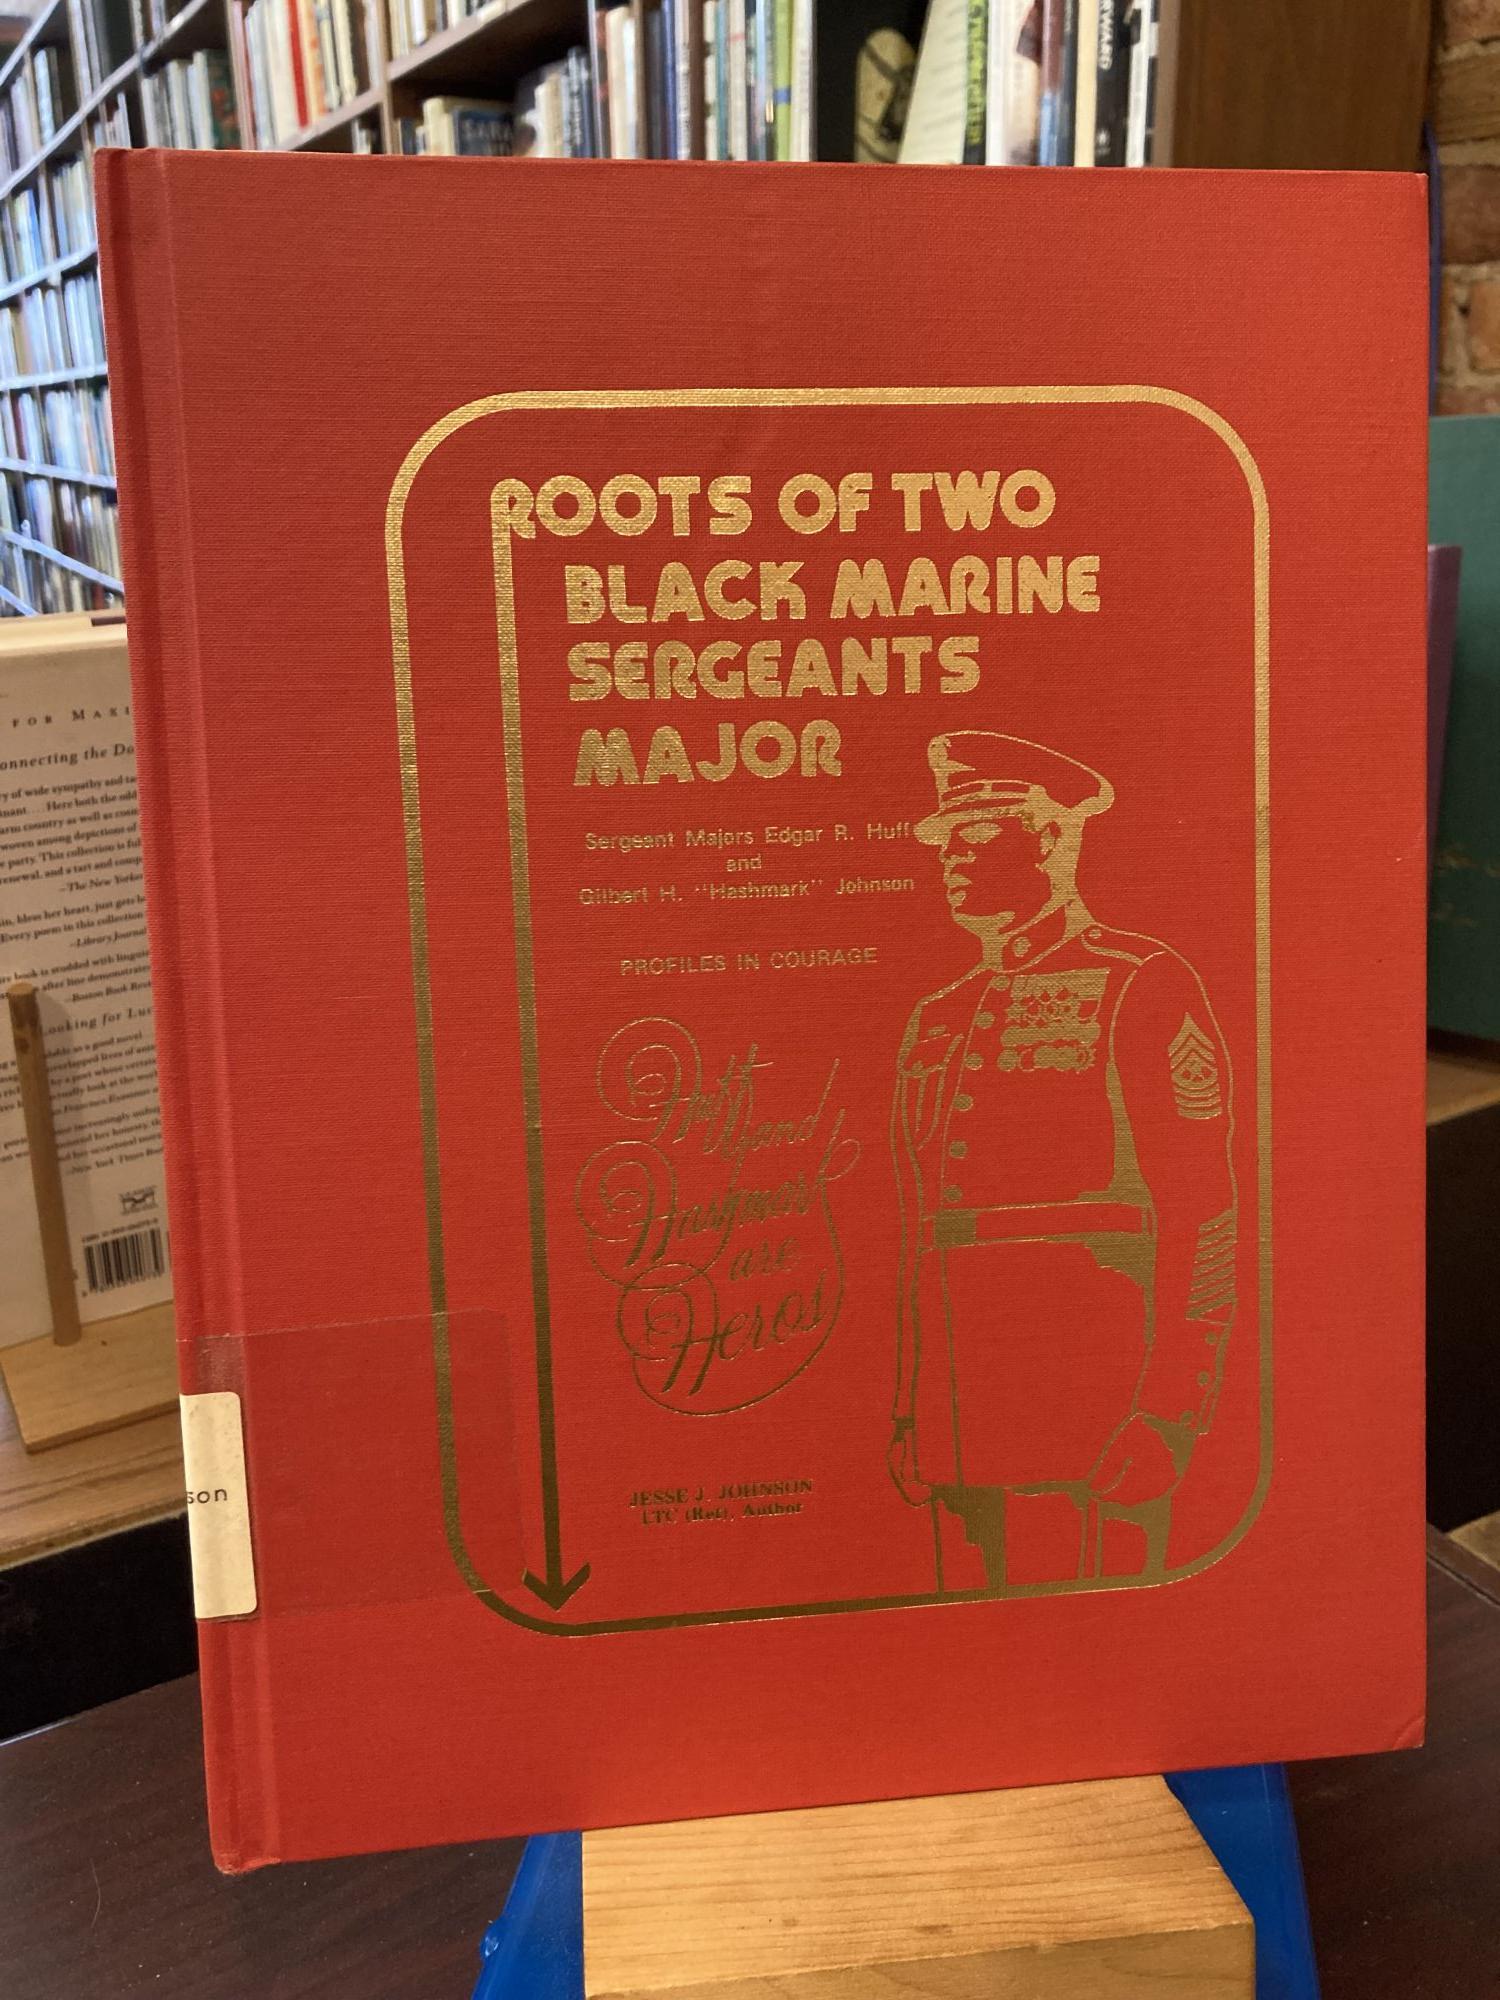 Roots of Two Black Marine Sergeants Major, Sergeants Major Edgar R. Huff and Gilbert H. Hashmark Johnson: Profiles in Courage : a Documented Pictorial History [Book]